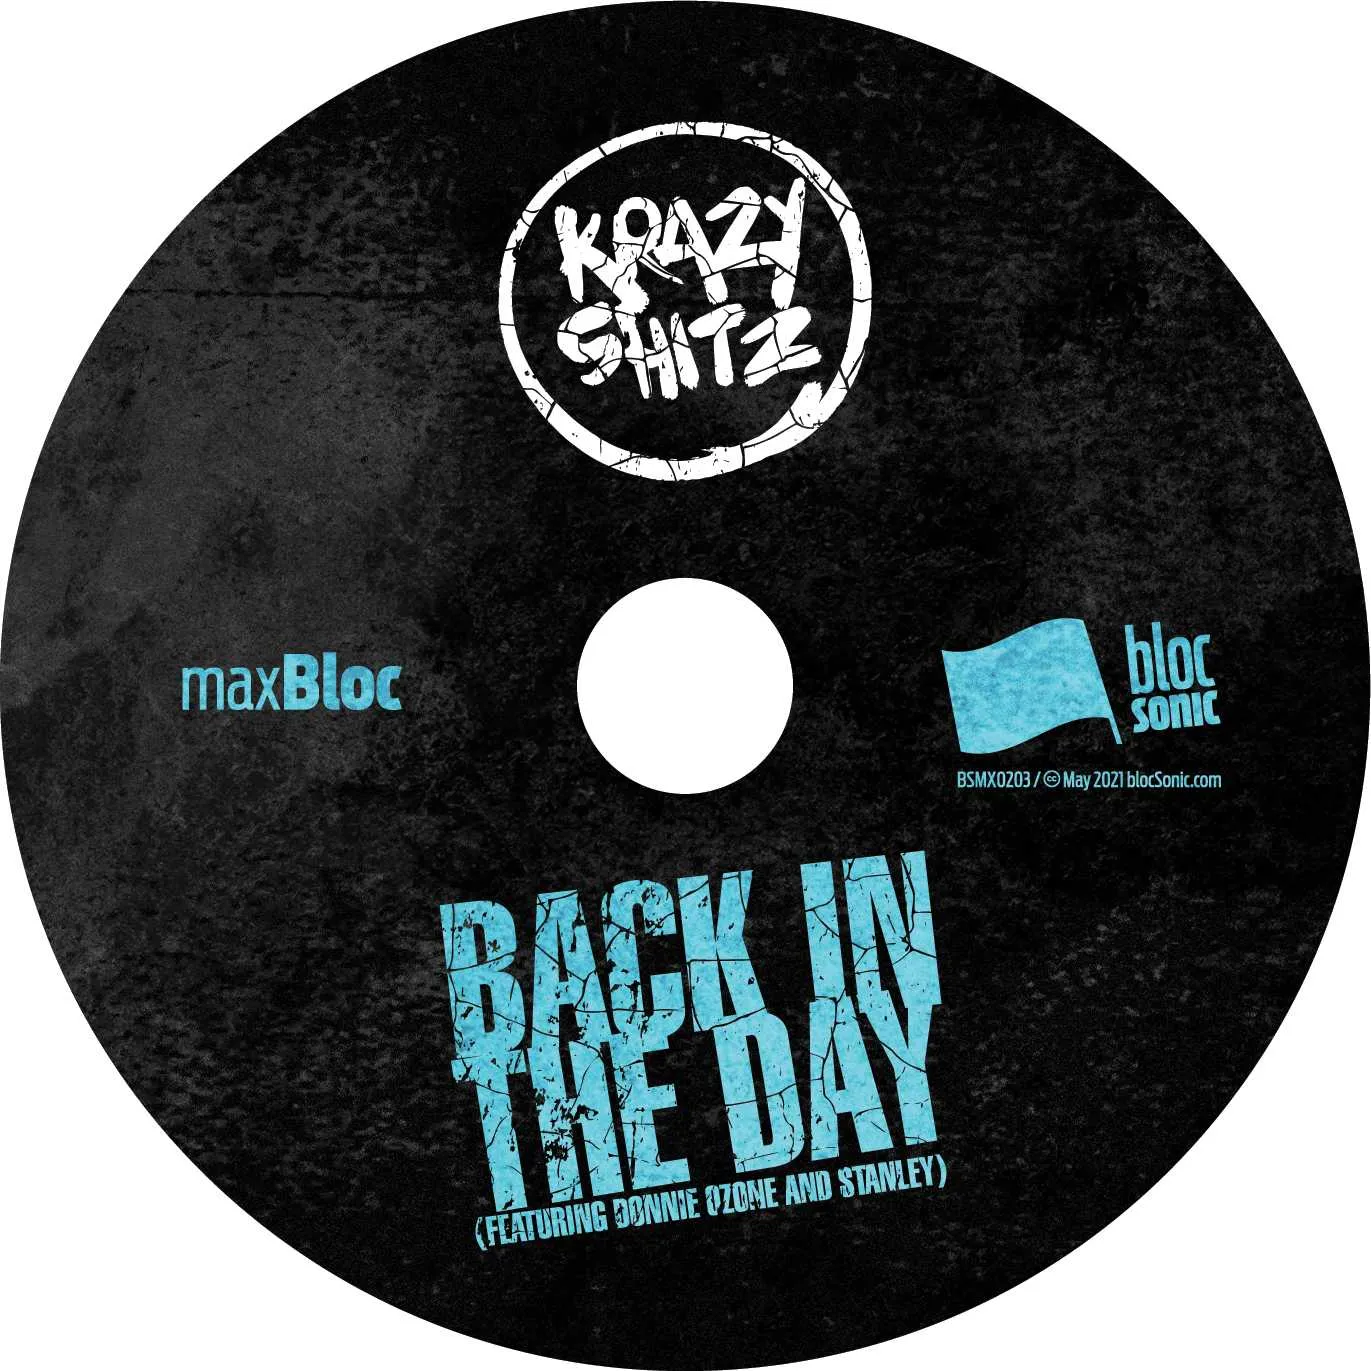 Album disc for “Back In The Day (Featuring Donnie Ozone and Stanley)” by Krazy Shitz